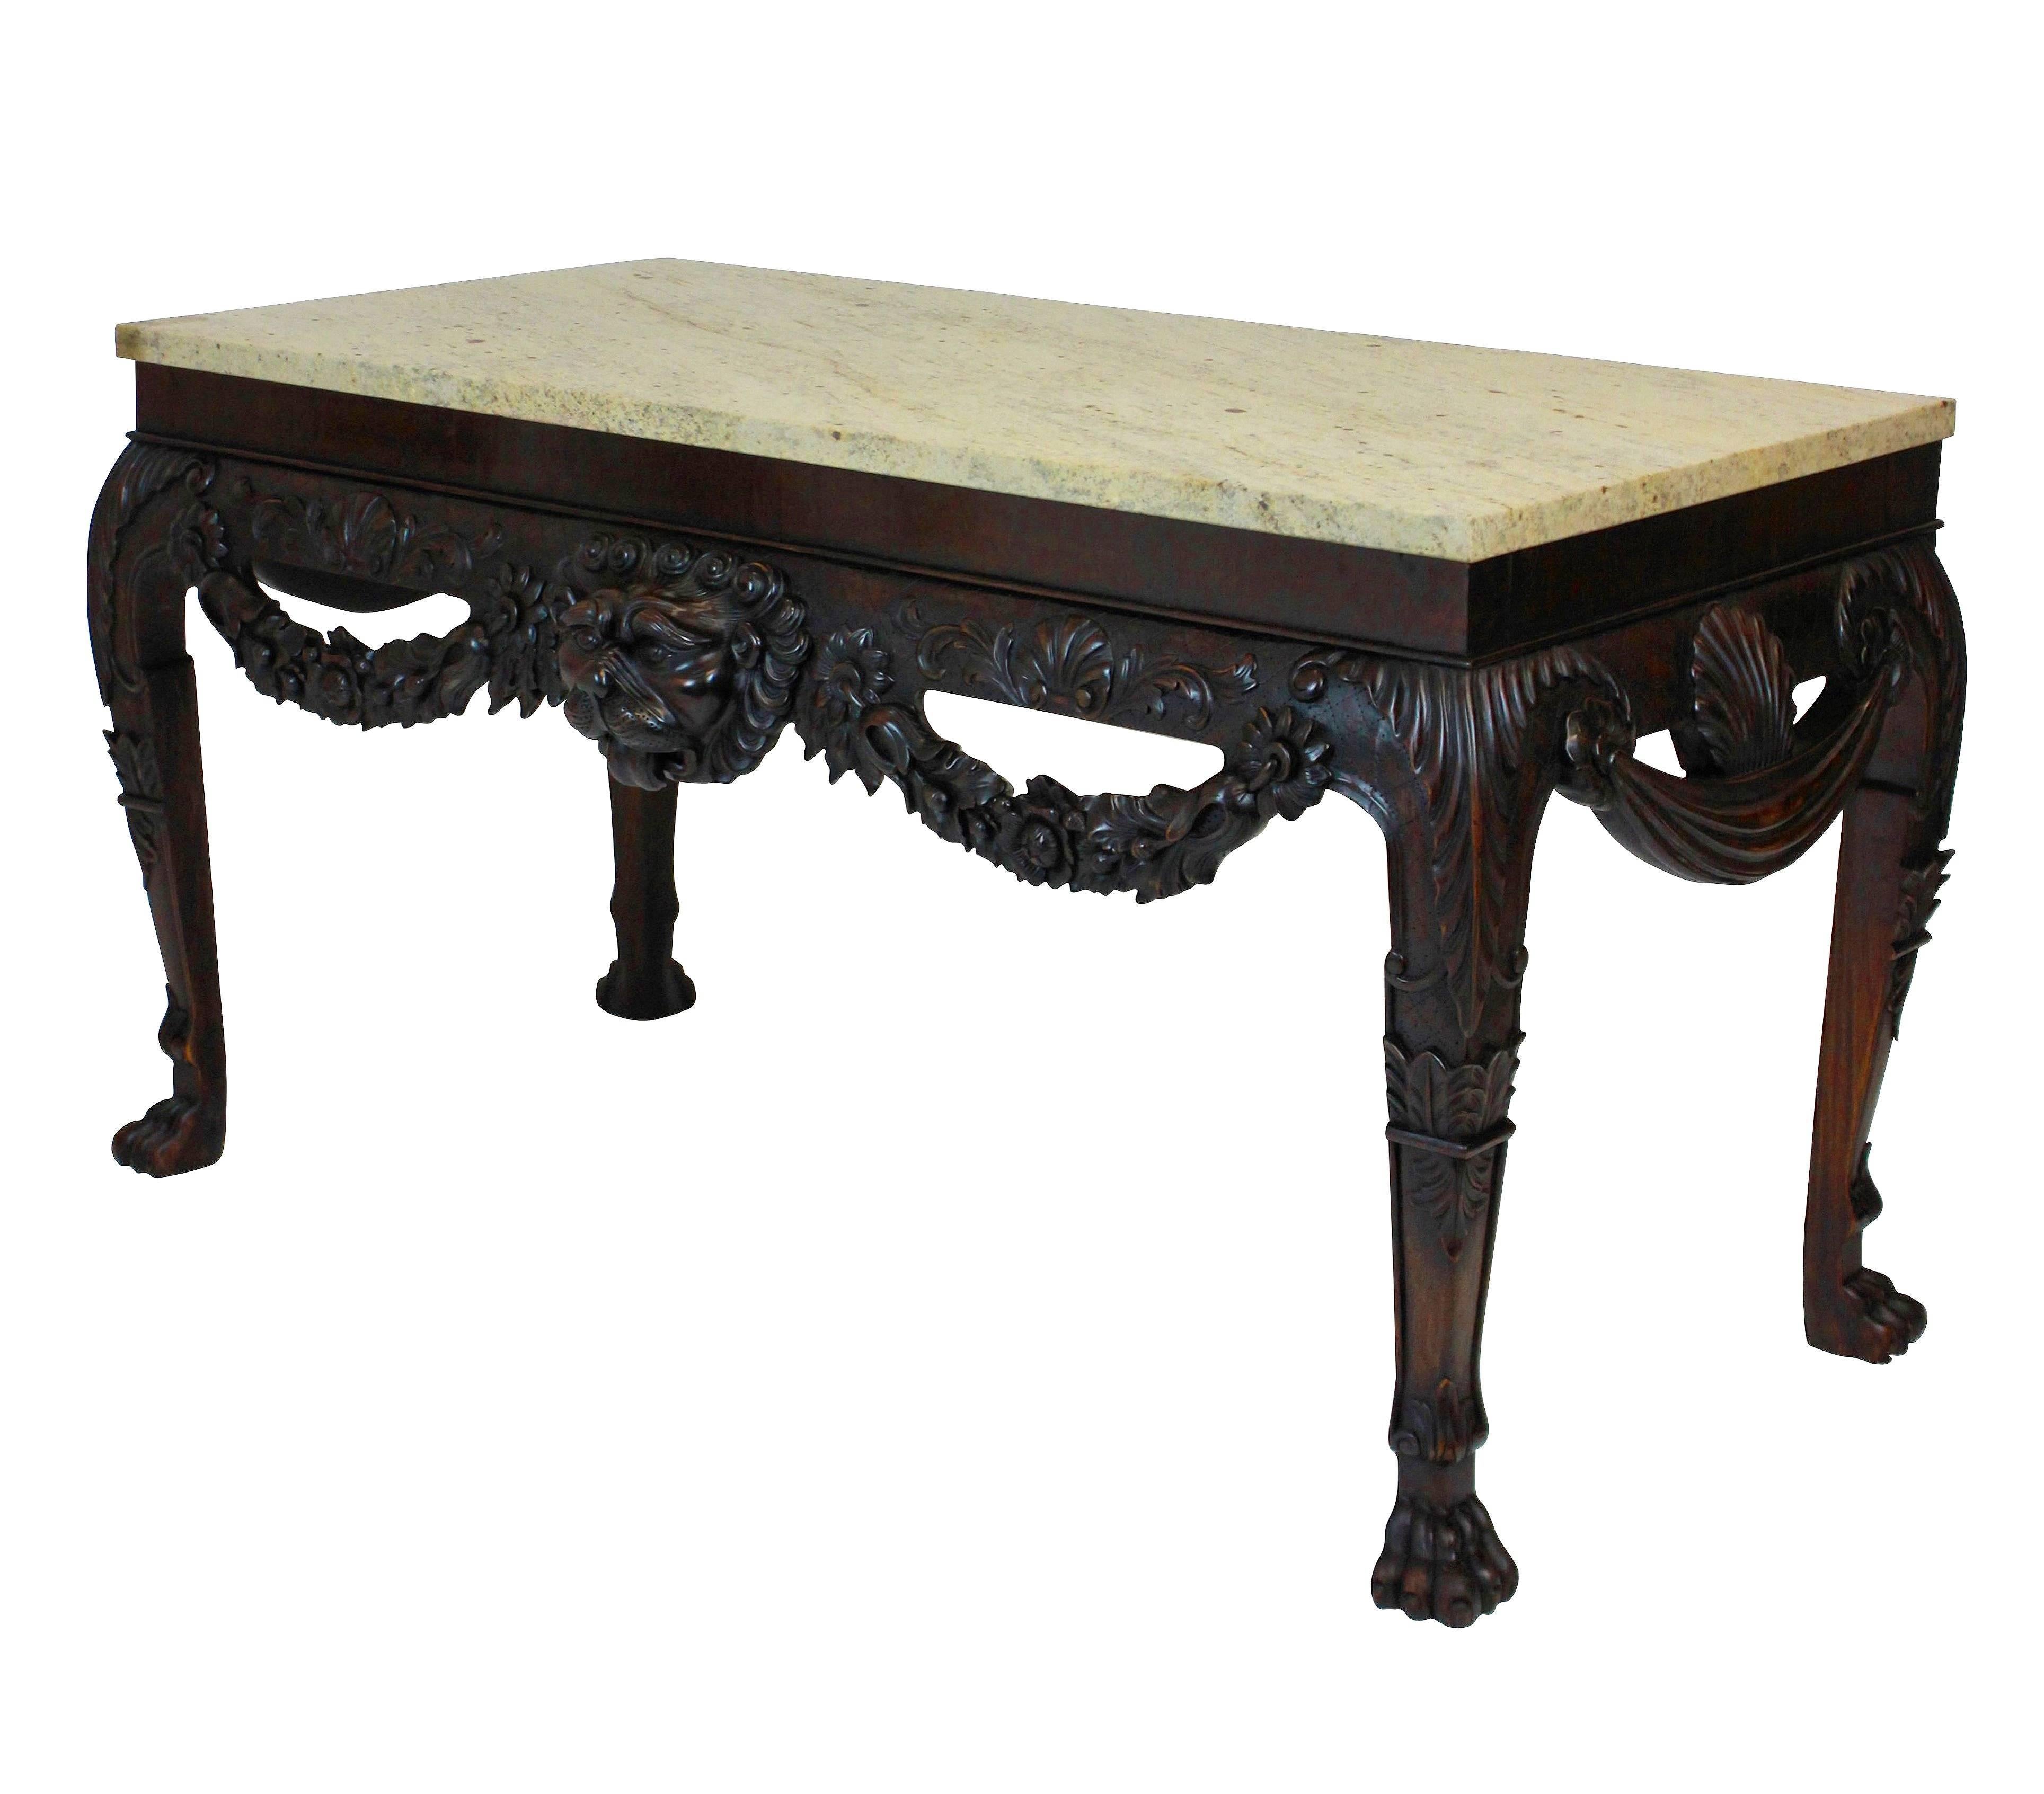 English Pair of William Kent Style Consoles in Mahogany